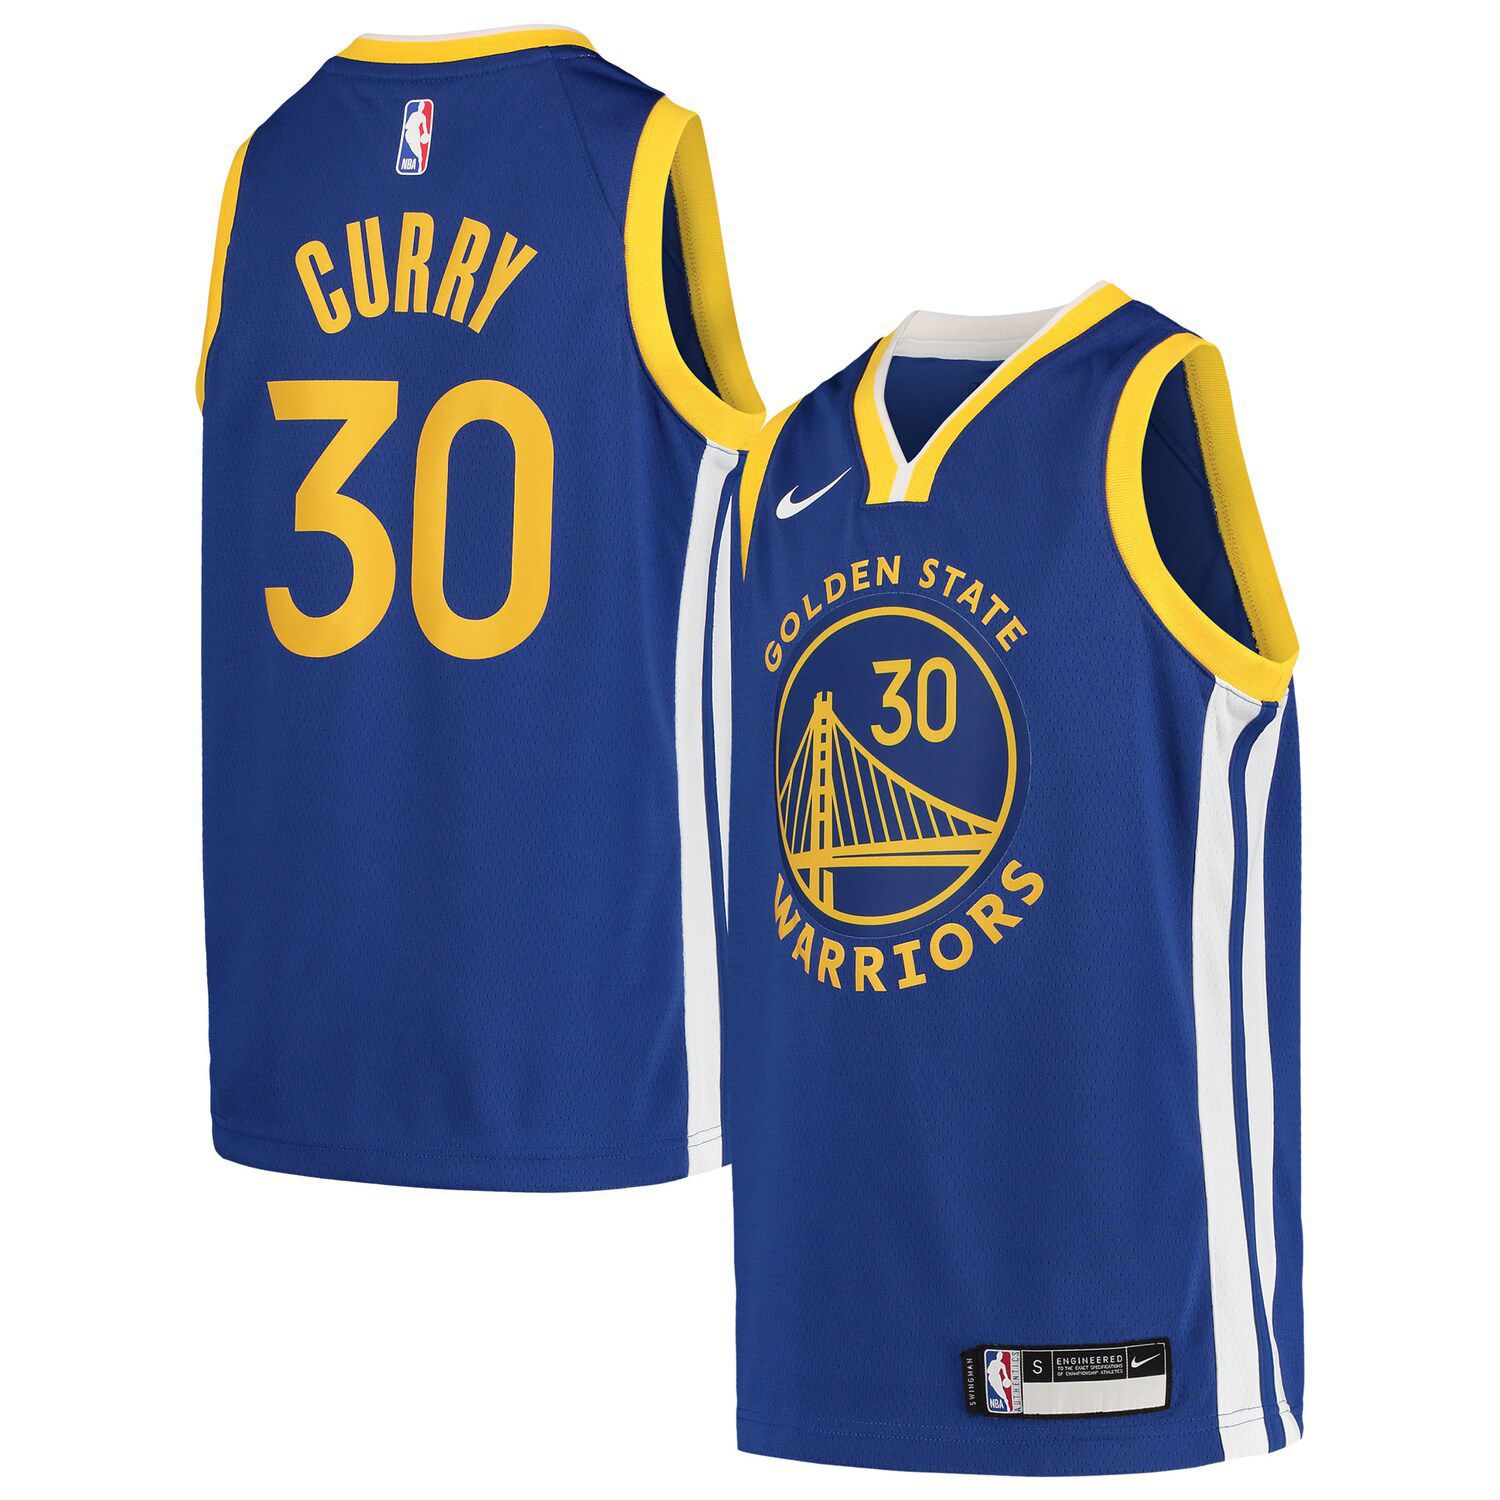 youth youth yellow stephen curry jersey